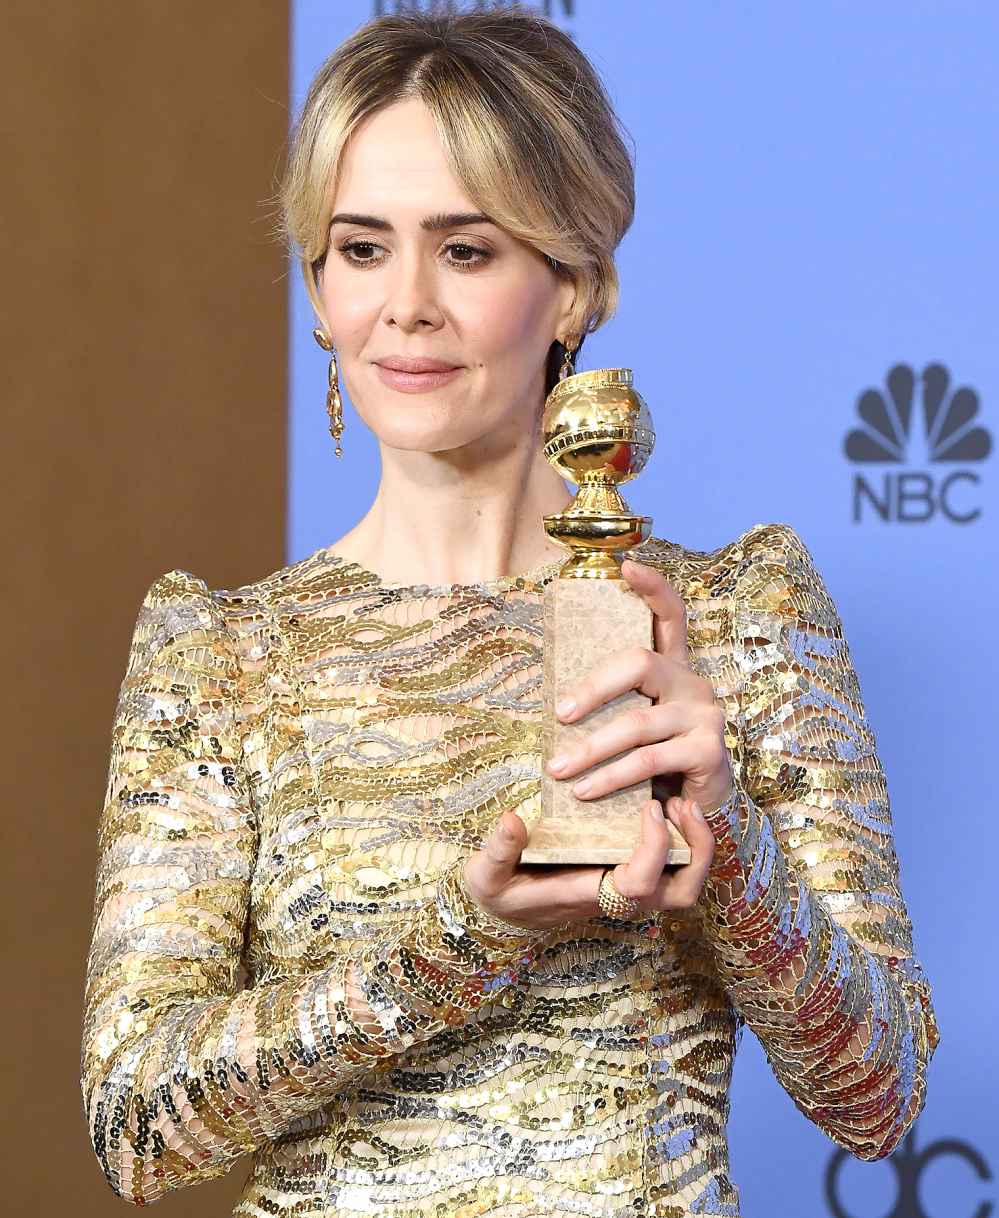 Sarah Paulson, winner of the Best Performance in a Miniseries or Television Film, for 'The People v. O.J. Simpson- American Crime Story'.